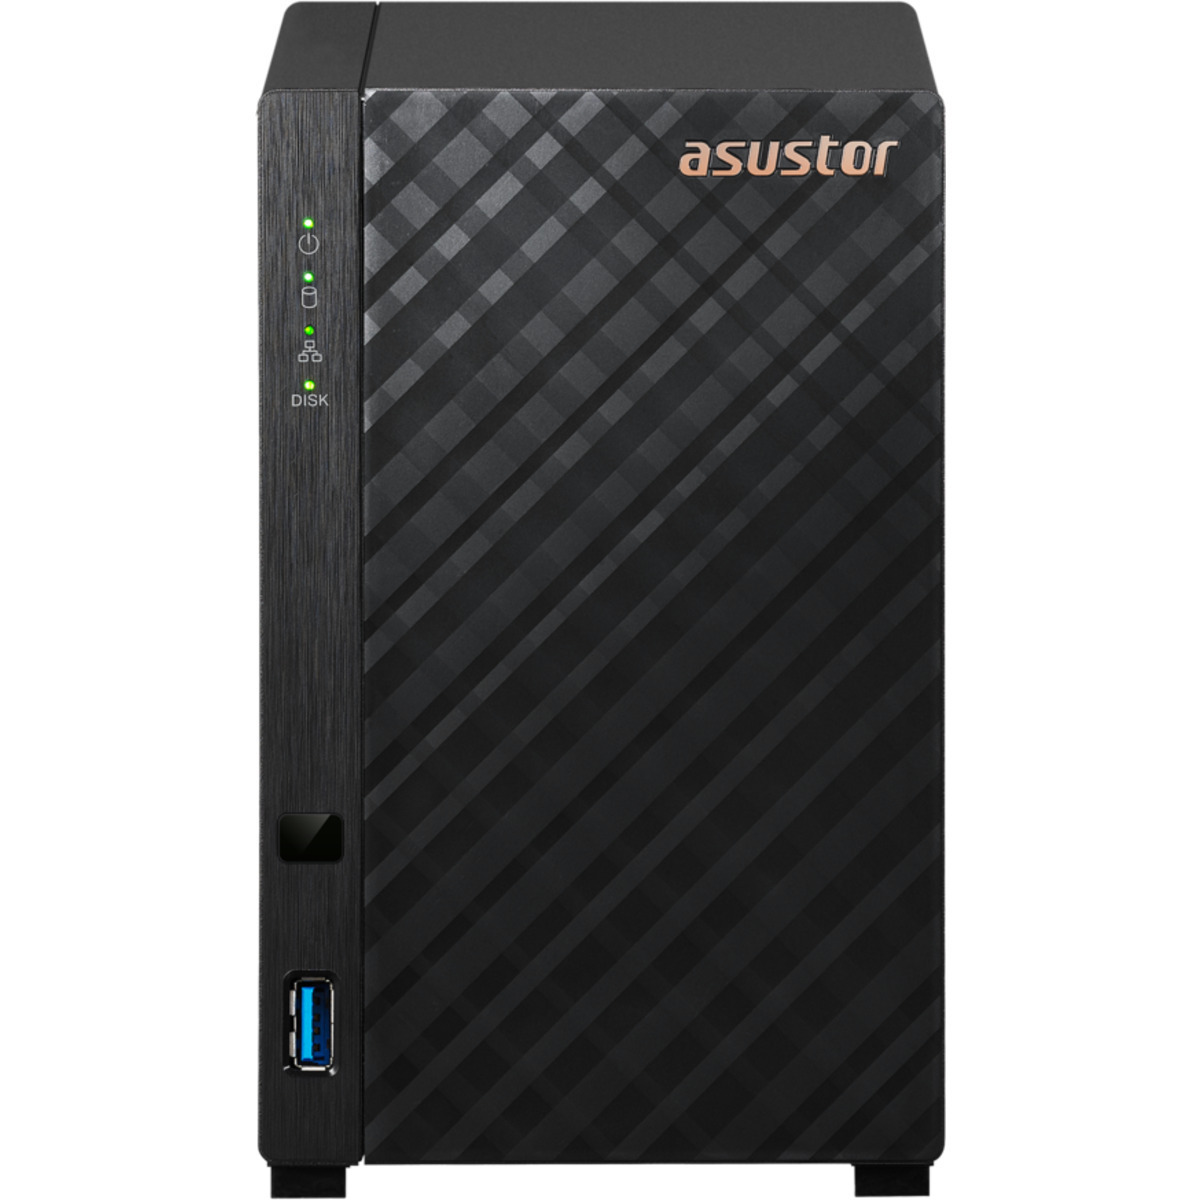 ASUSTOR DRIVESTOR 2 Lite AS1102TL 12tb 2-Bay Desktop Personal / Basic Home / Small Office NAS - Network Attached Storage Device 2x6tb Seagate BarraCuda ST6000DM003 3.5 5400rpm SATA 6Gb/s HDD CONSUMER Class Drives Installed - Burn-In Tested DRIVESTOR 2 Lite AS1102TL